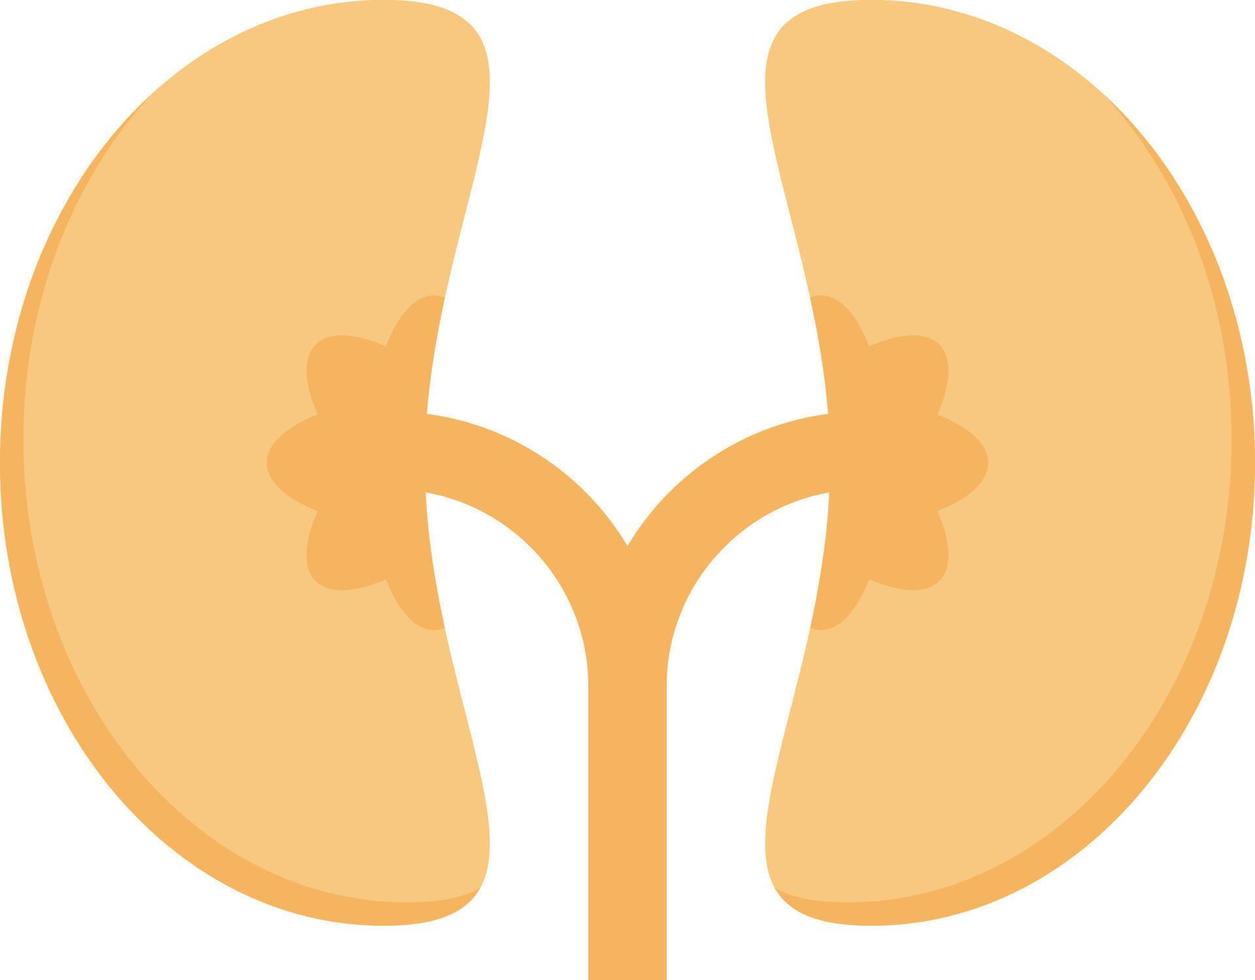 kidney vector illustration on a background.Premium quality symbols.vector icons for concept and graphic design.